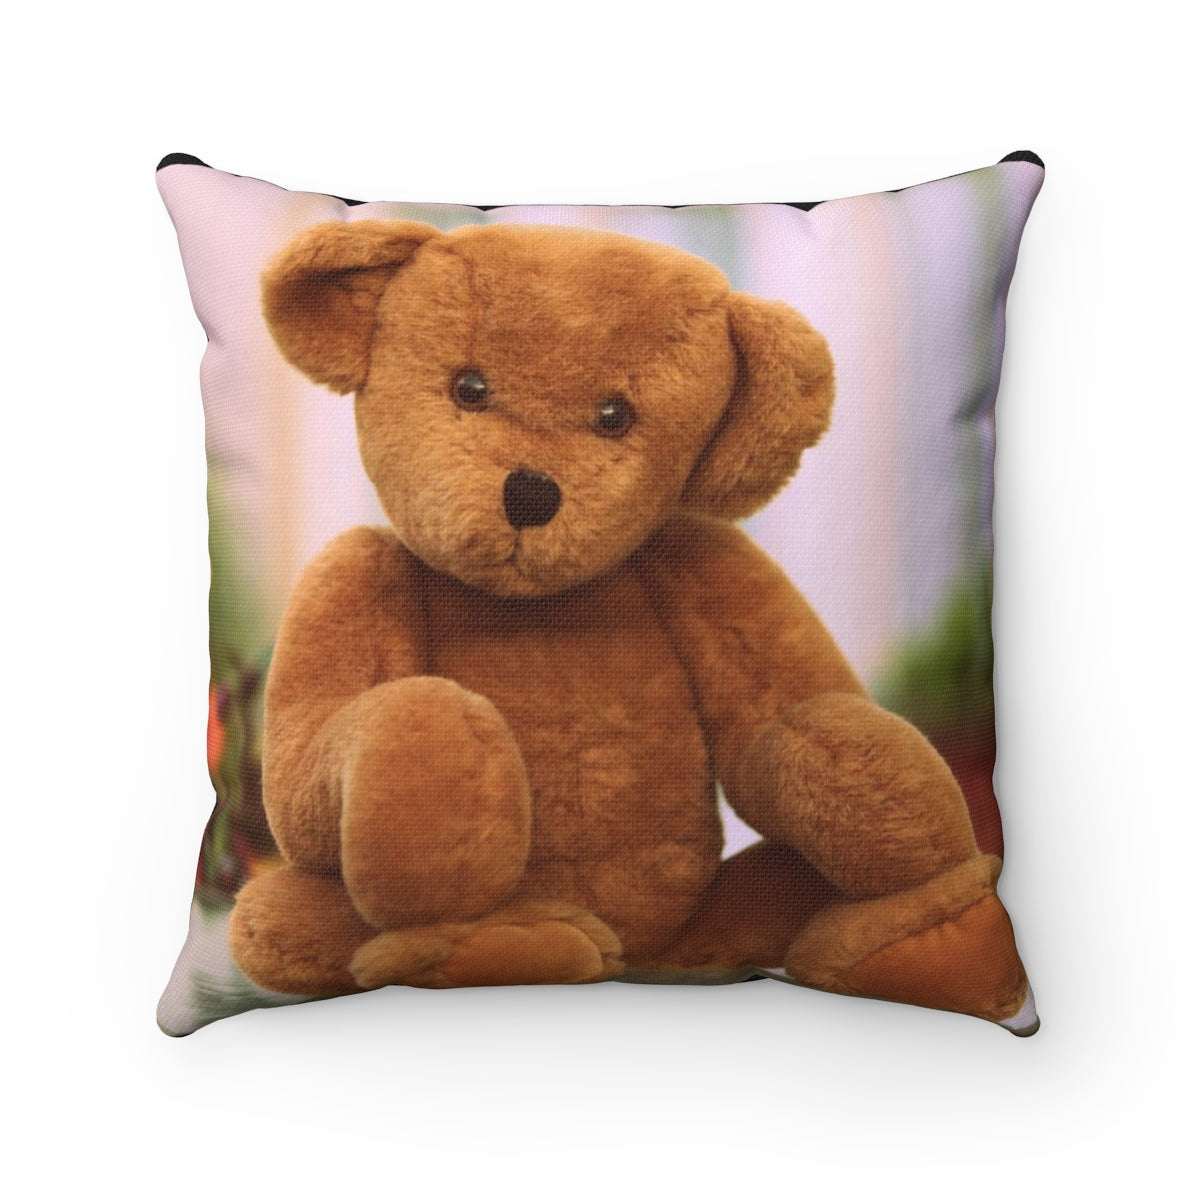 Five Toes Down Teddy Spun Polyester Square Pillow